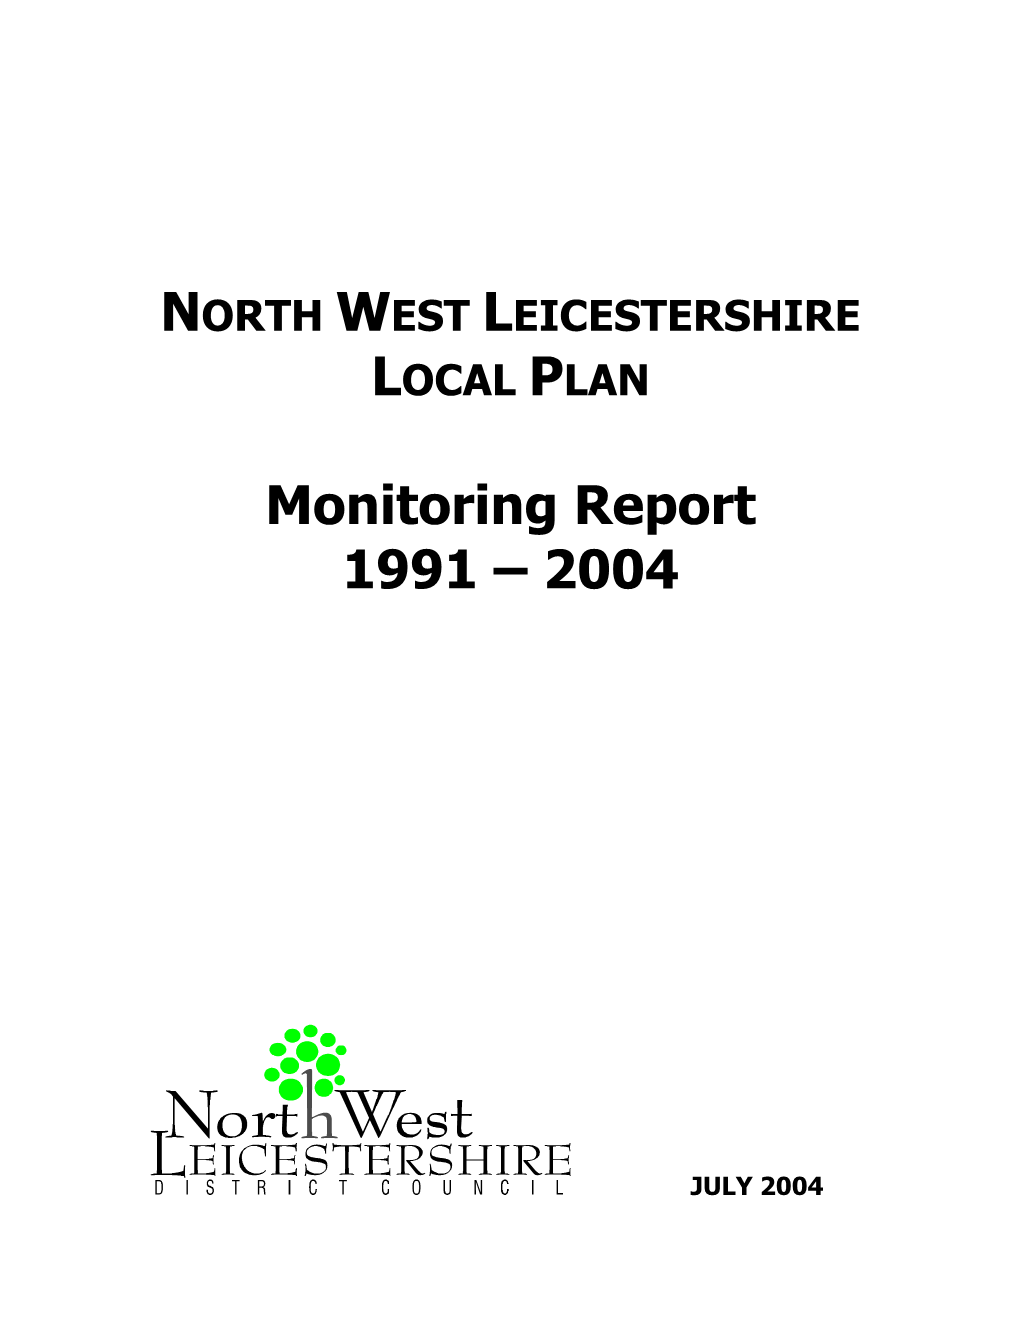 Annual Monitoring Report 2004